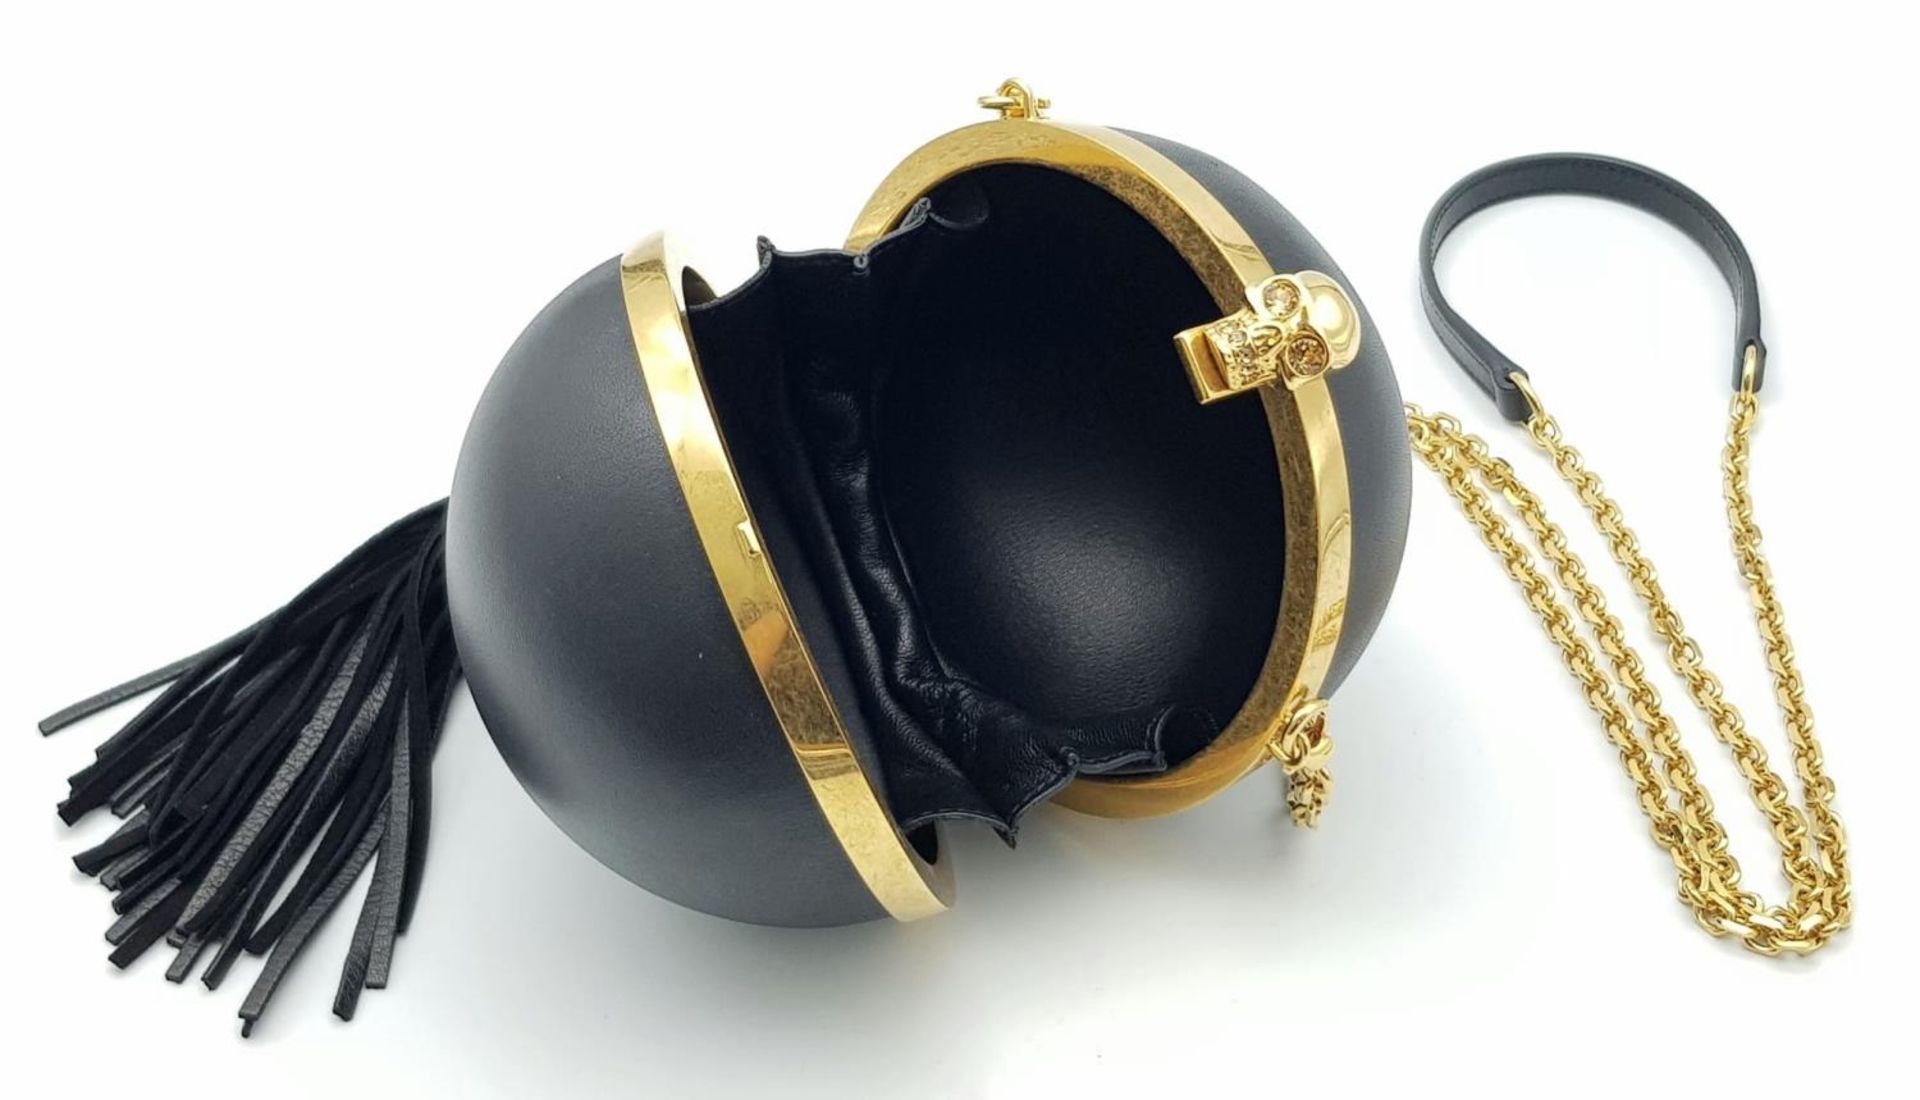 An Alexander Mcqueen Skull Ball Clutch Bag. Black leather exterior with gold tone hardware. - Image 3 of 6